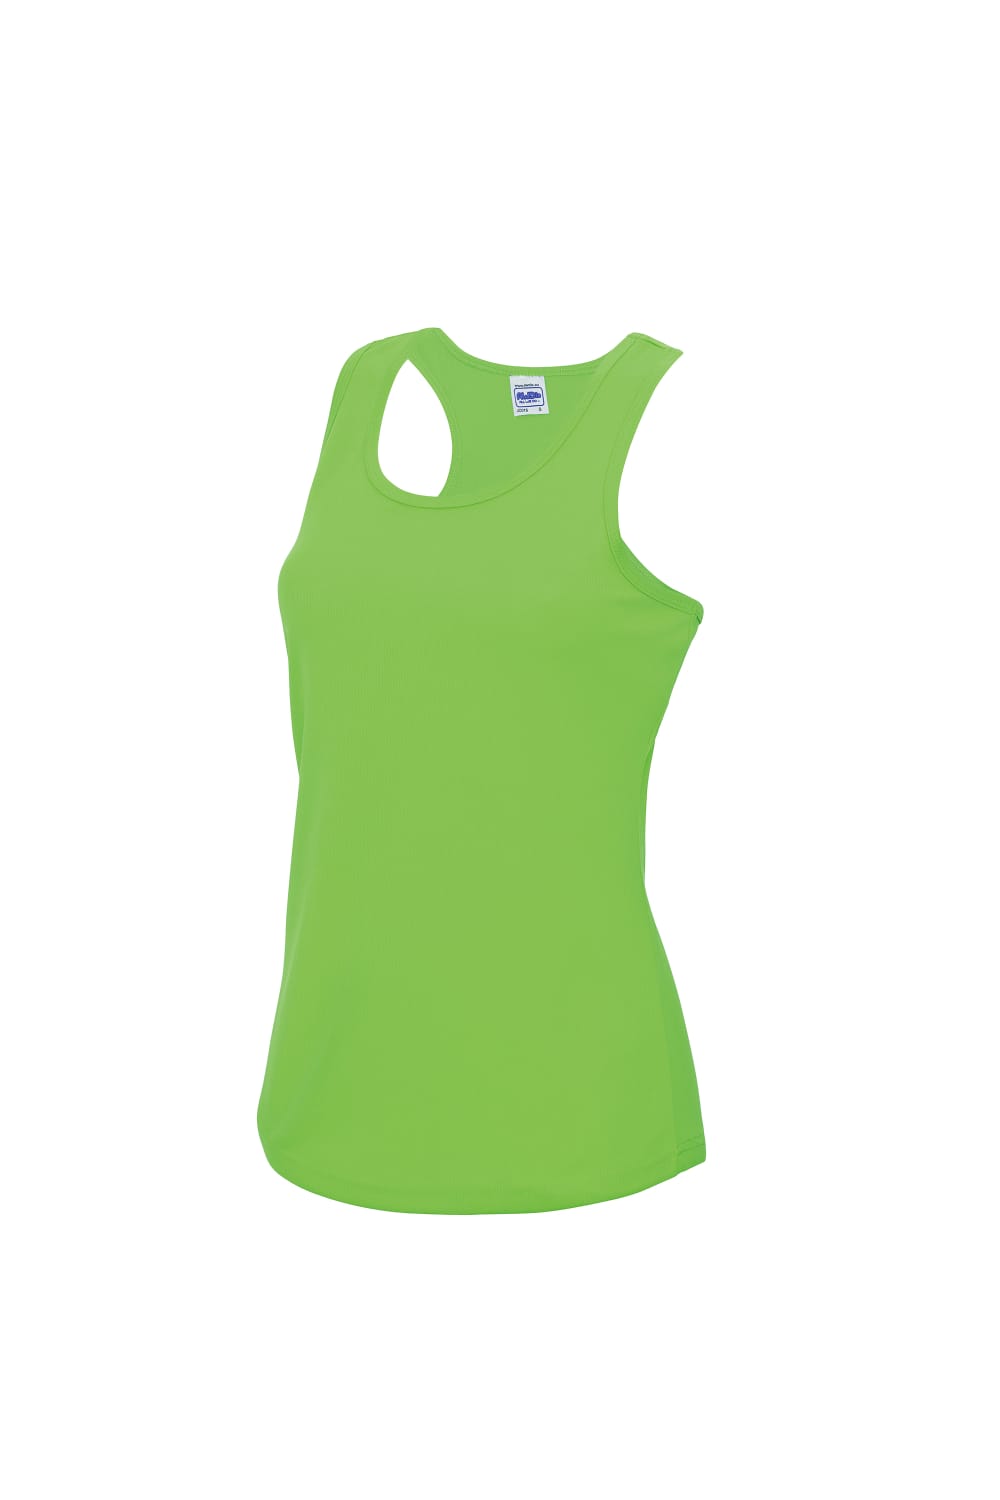 Just Cool Girlie Fit Sports Ladies Vest / Tank Top (Electric Green)